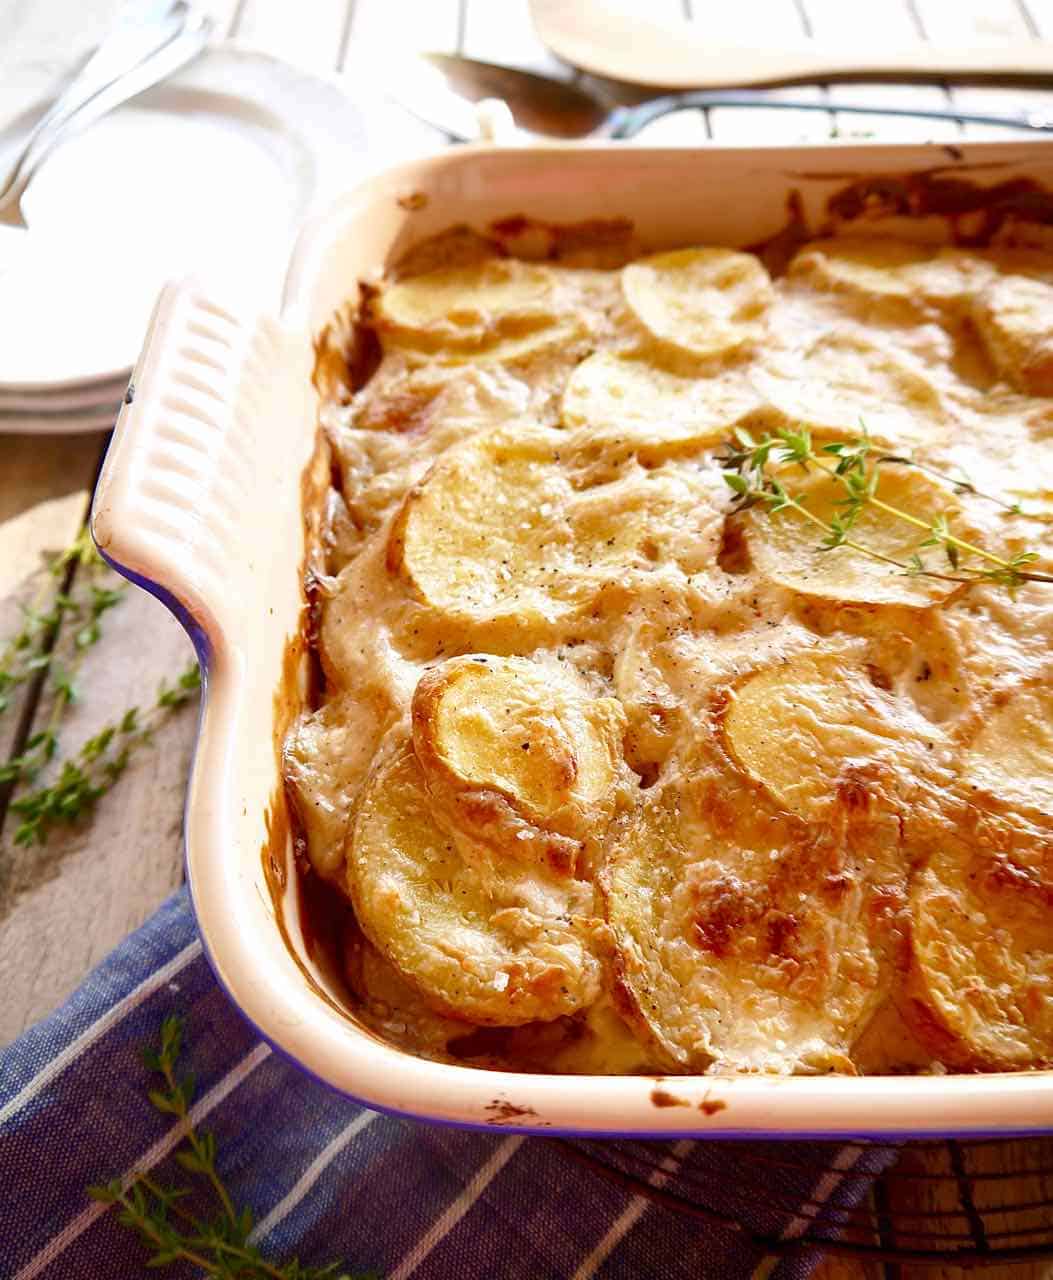 Dairy-free potatoes gratin baked in a dish until crispy.